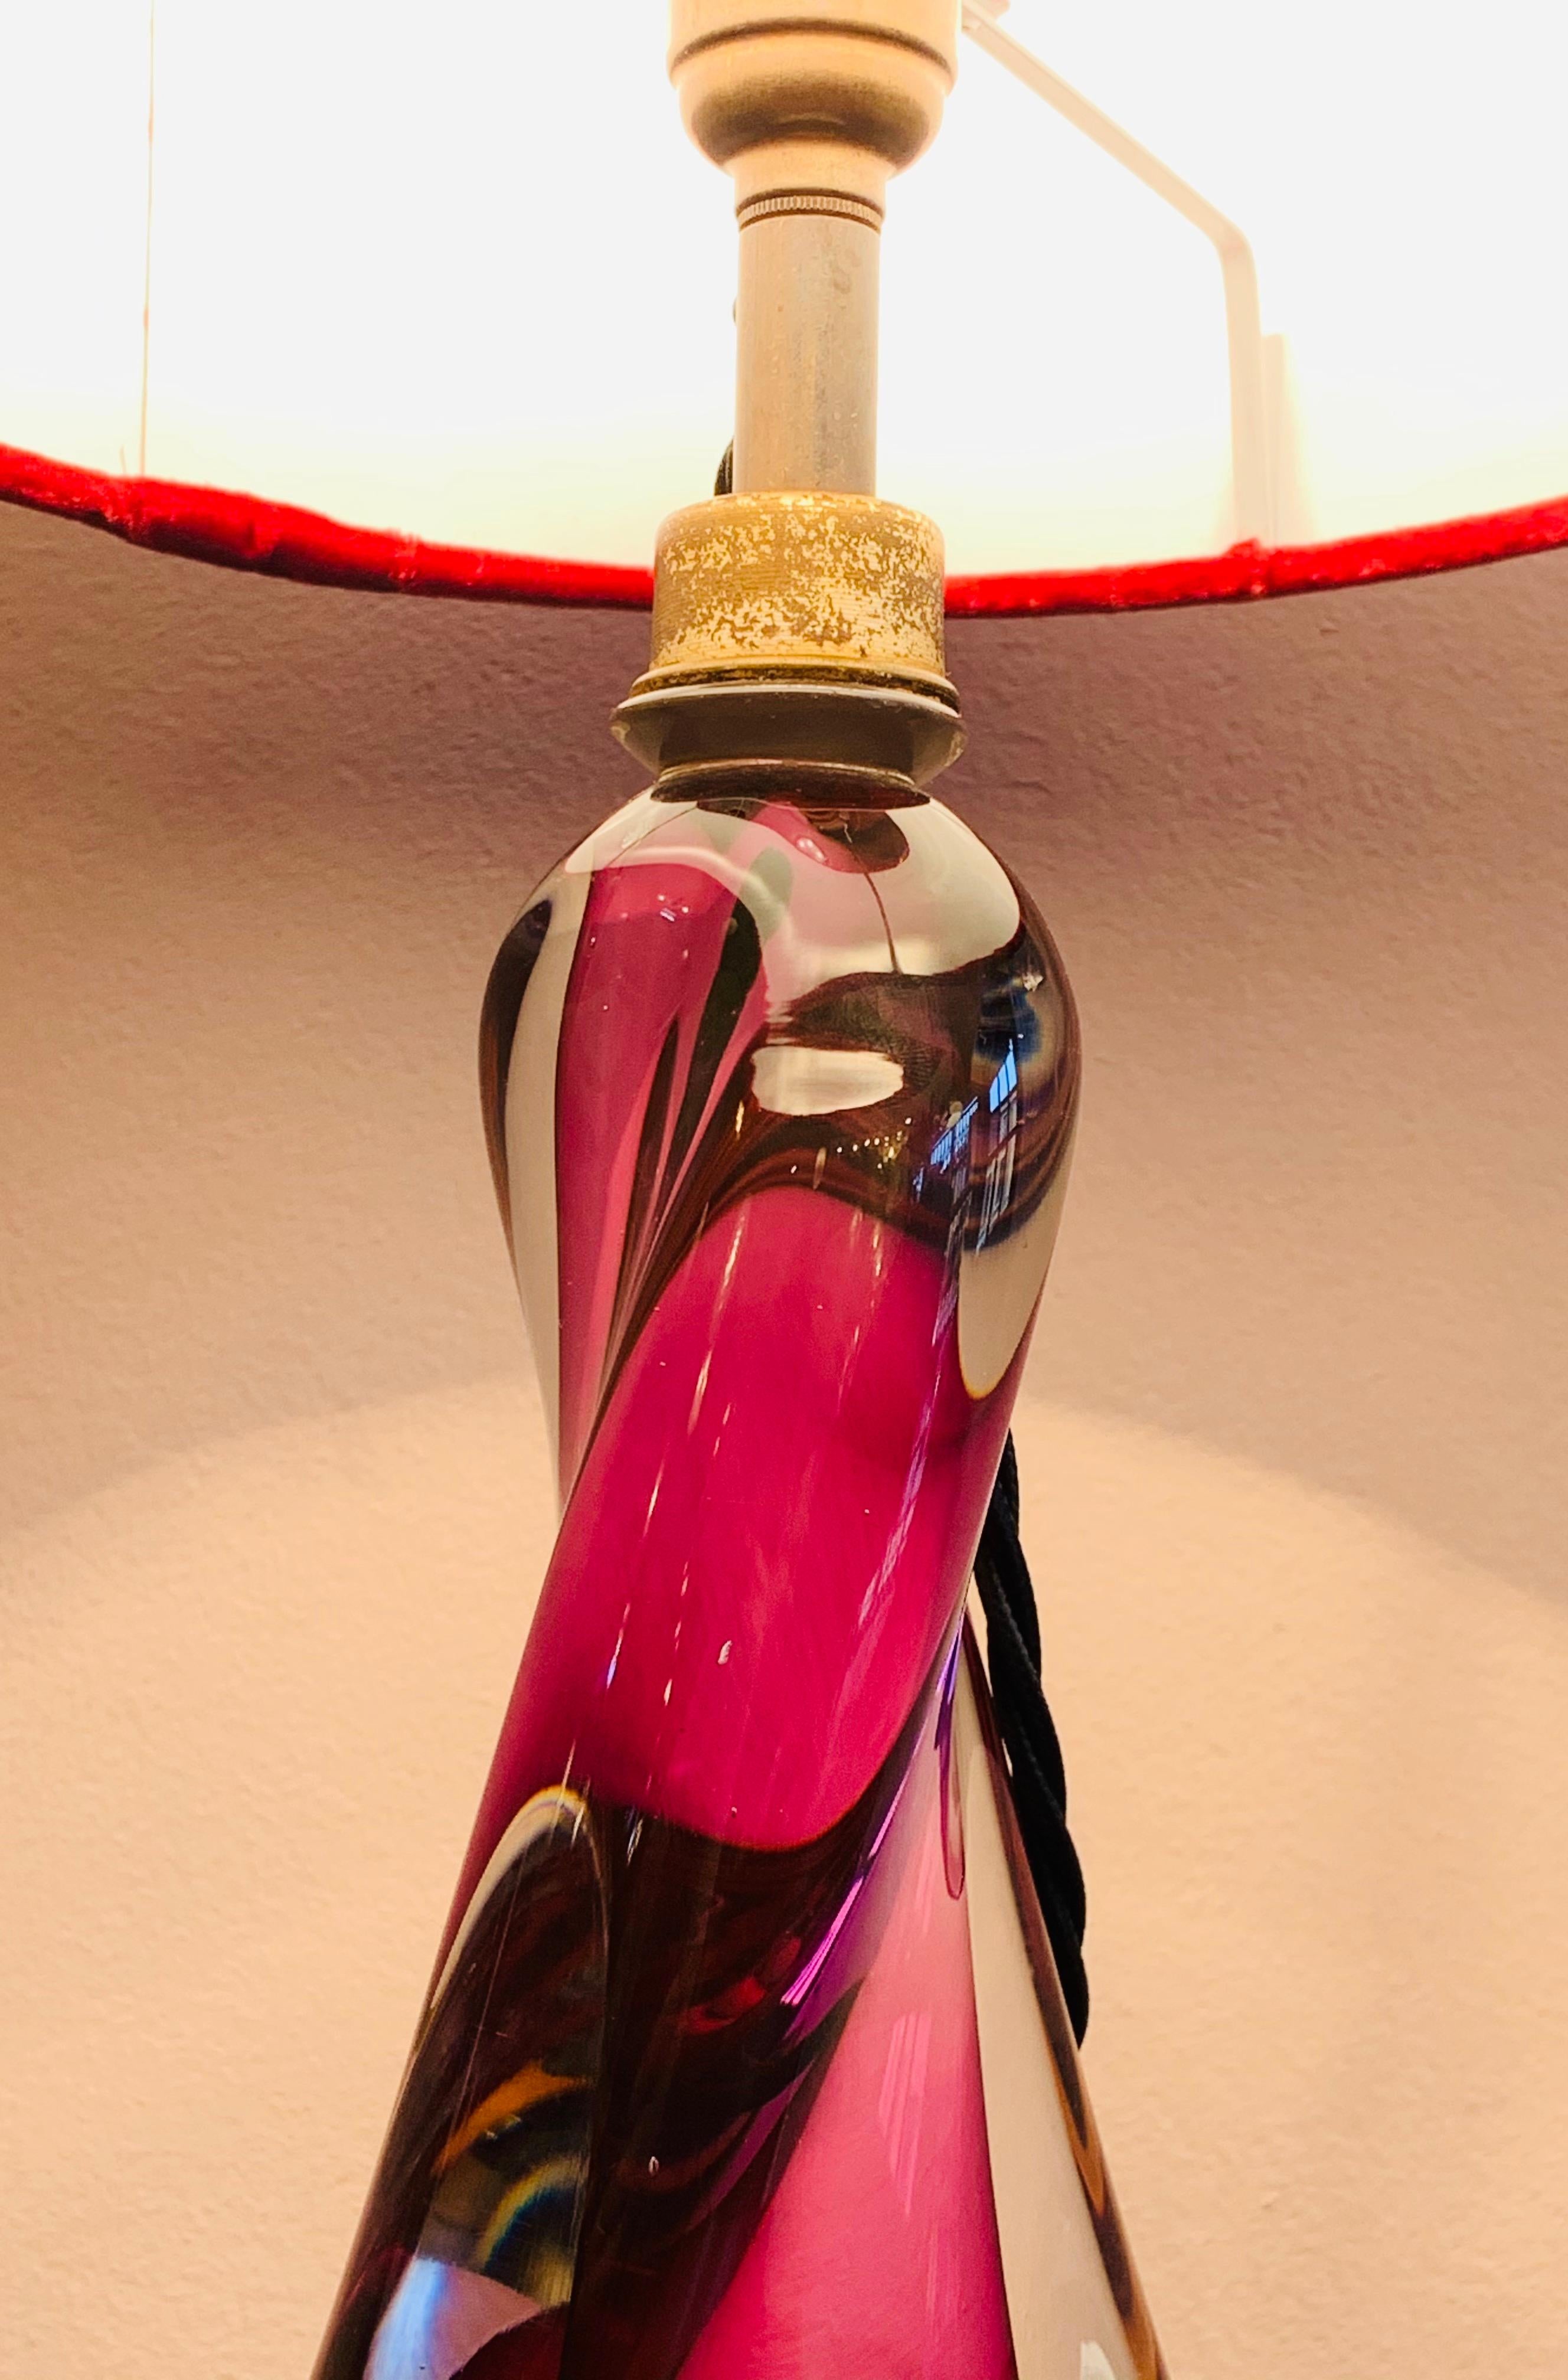 1950s Val St Lambert, purple and clear glass, twisted crystal lamp base with a vintage brass light fitting. Hand blown in heavy lead crystal glass in Belgium. The brand new deep pink velvet shade is included. The lamp is definitely a Val St Lambert